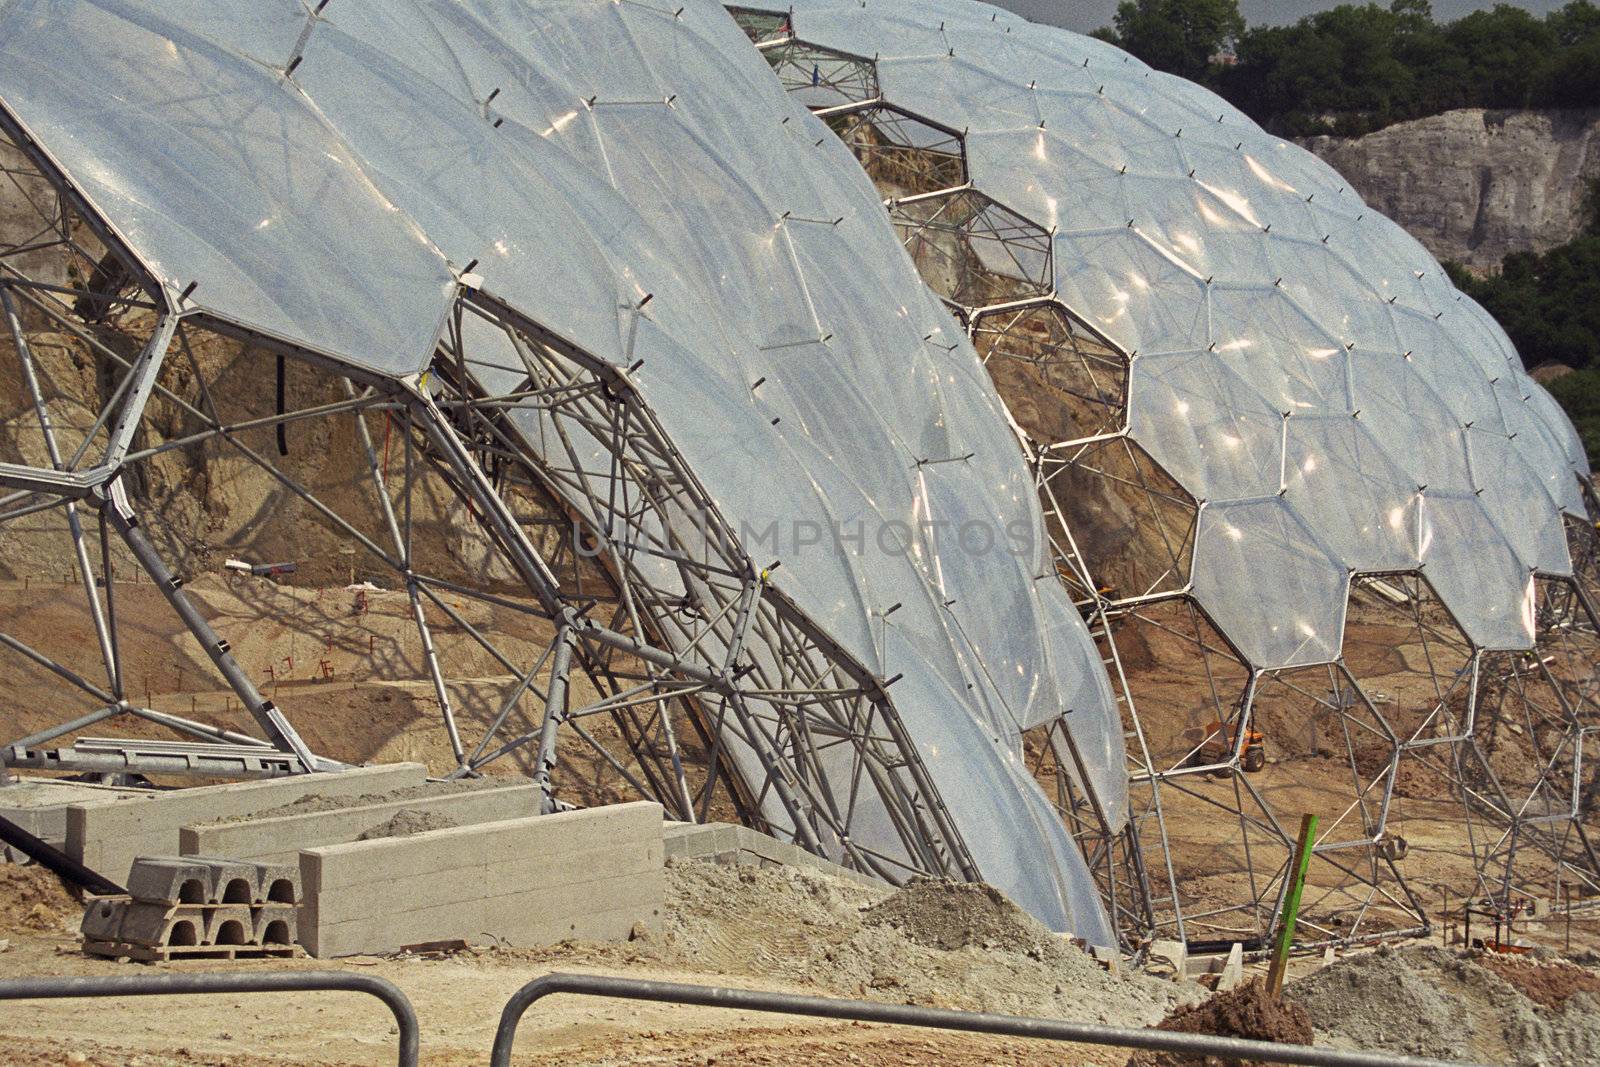 Partially finished domes or "biomes" at the Eden Project in Cornwall